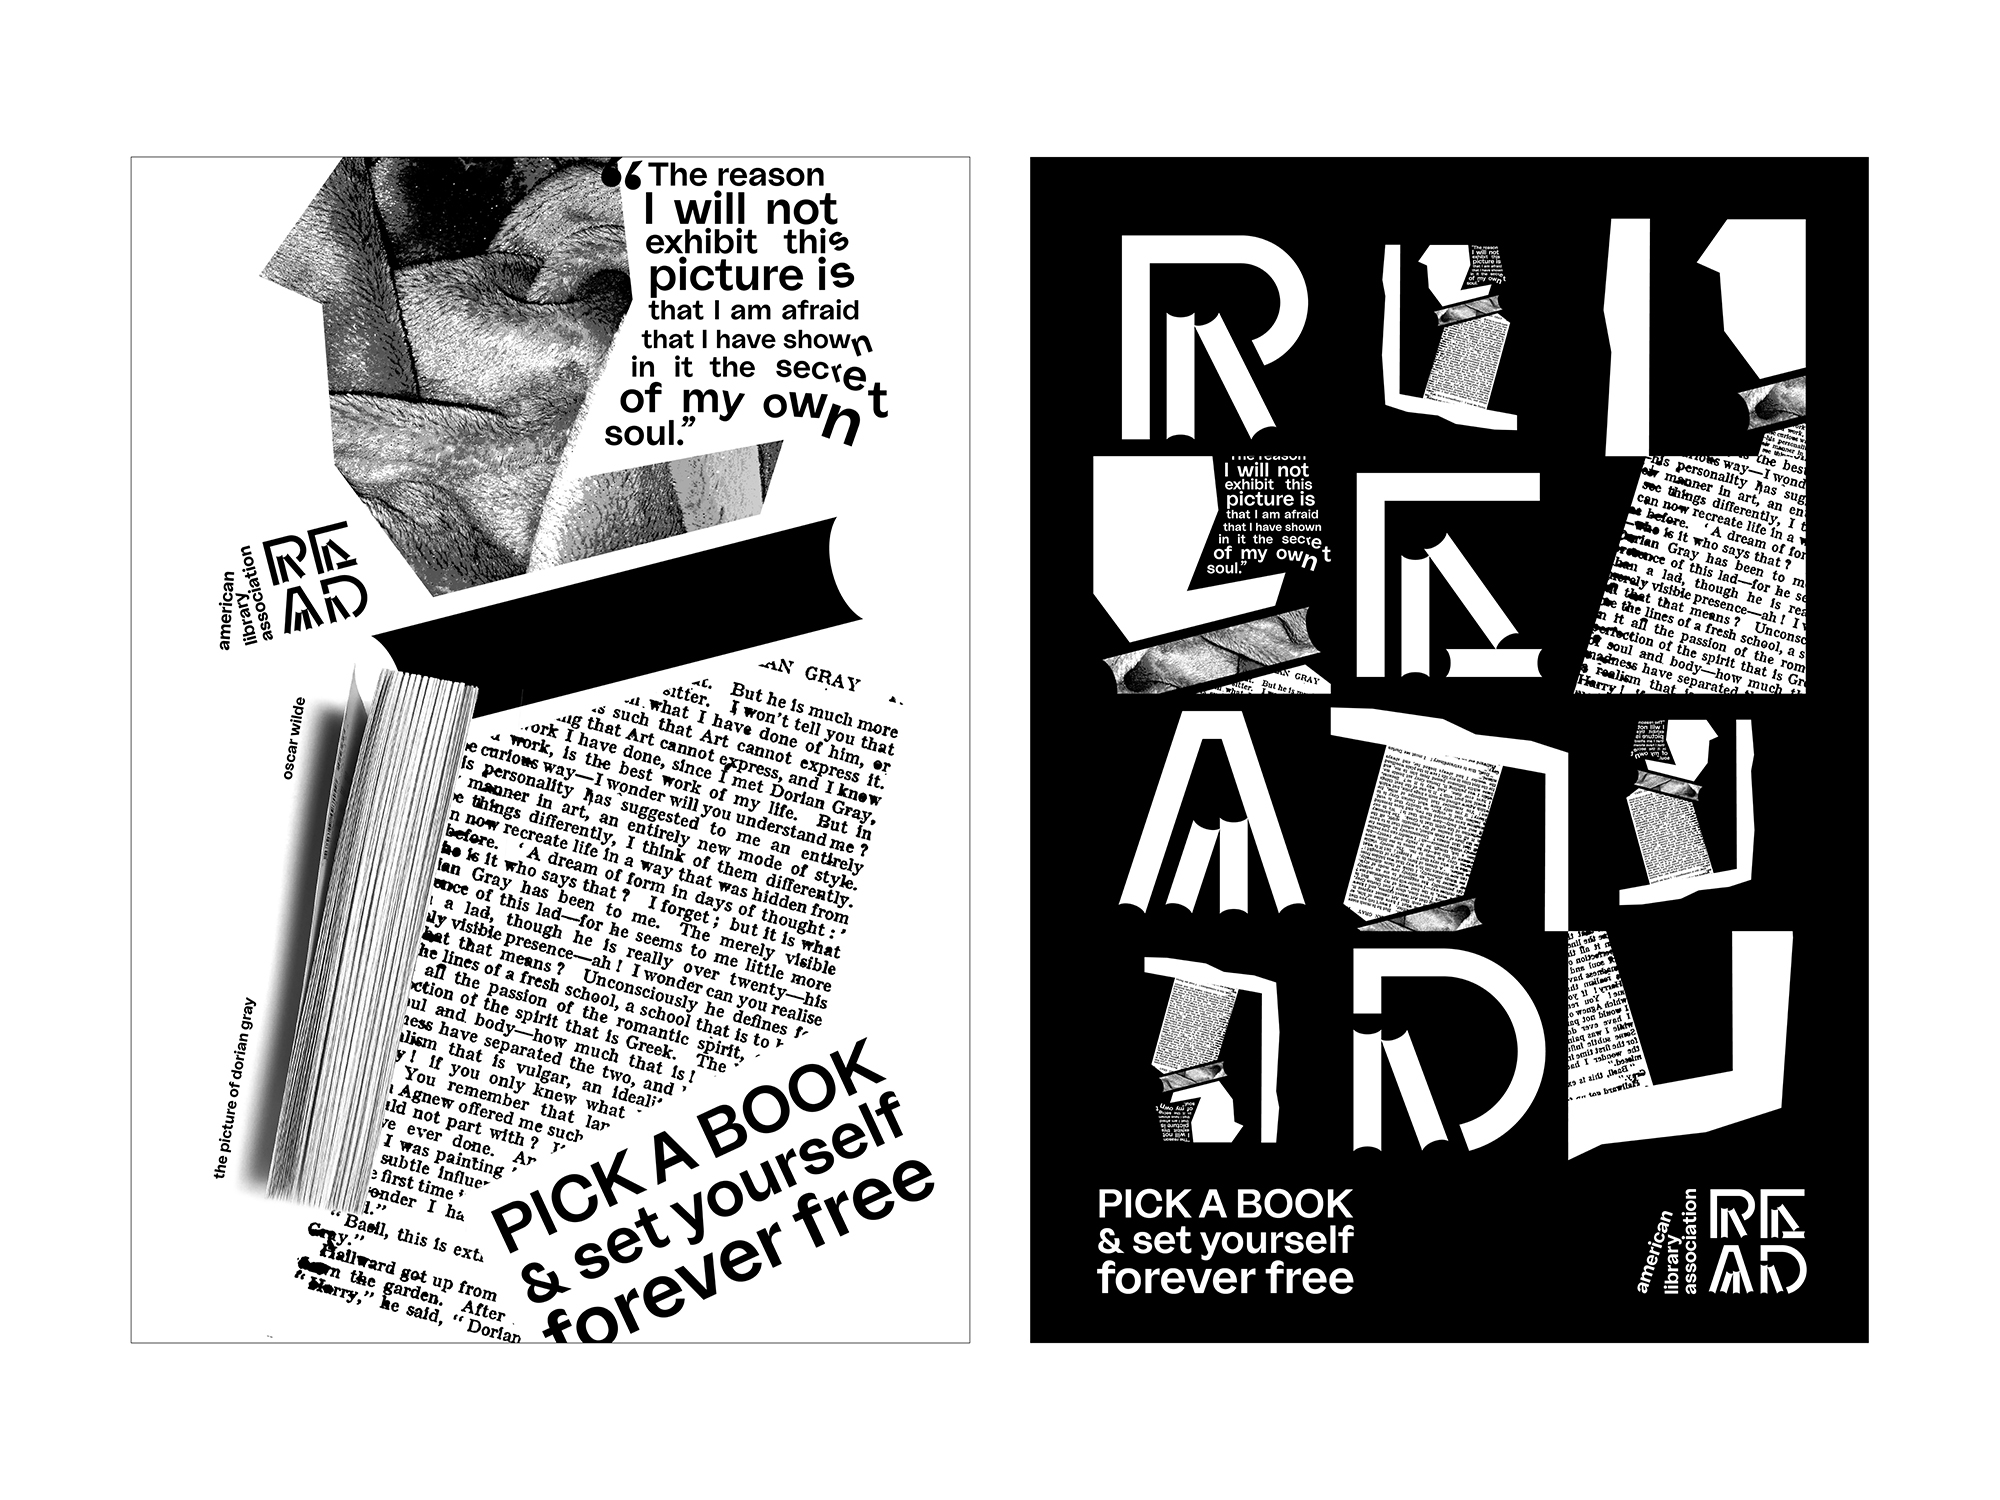 Typography-based design encouraging people to read.